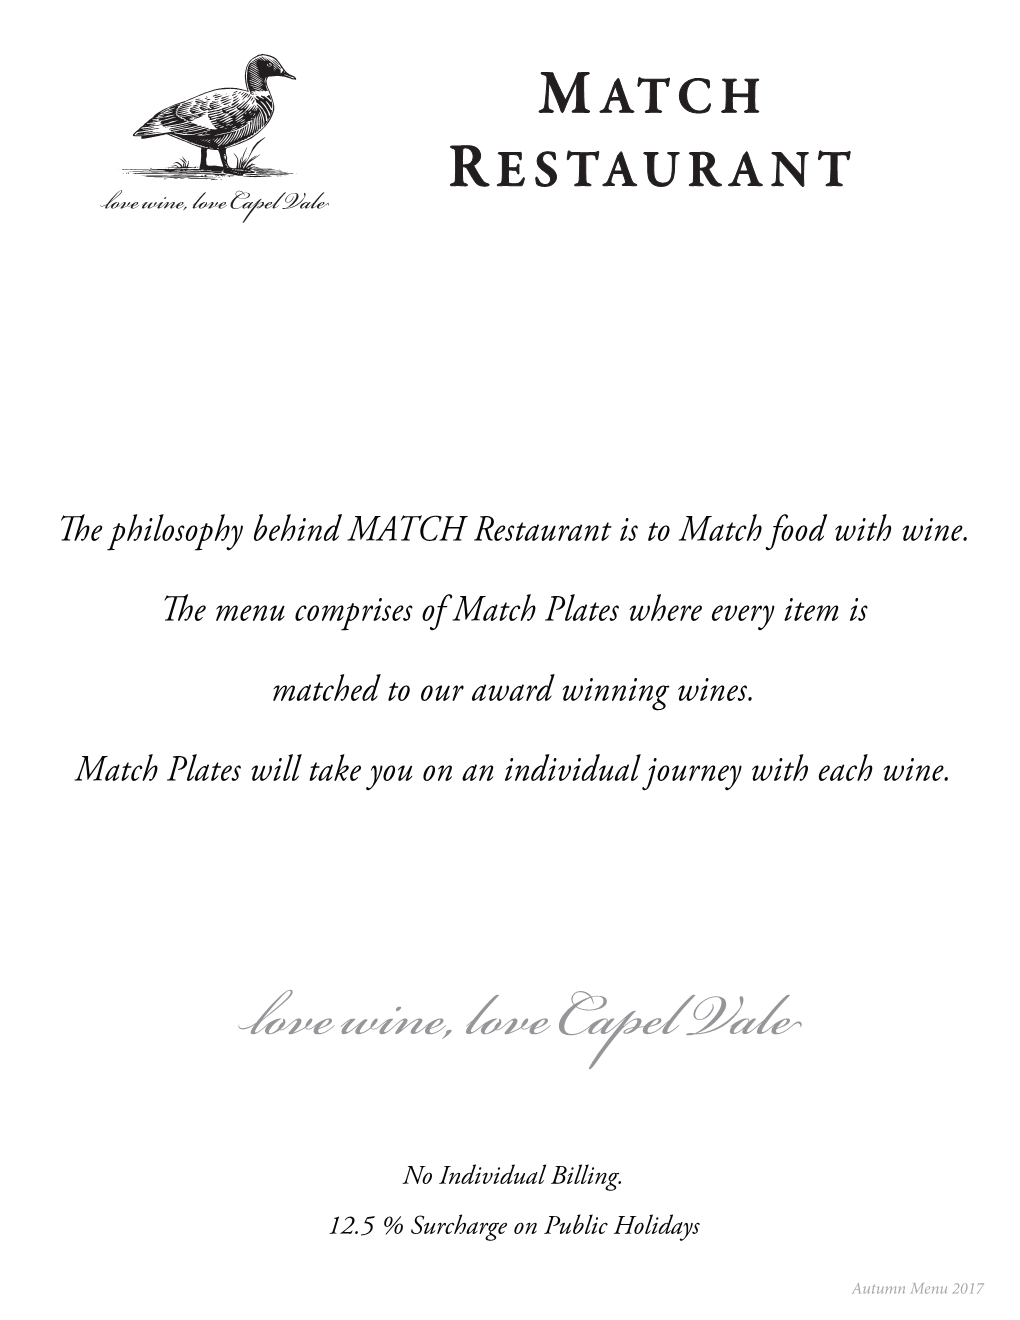 MATCH Restaurant Is to Match Food with Wine